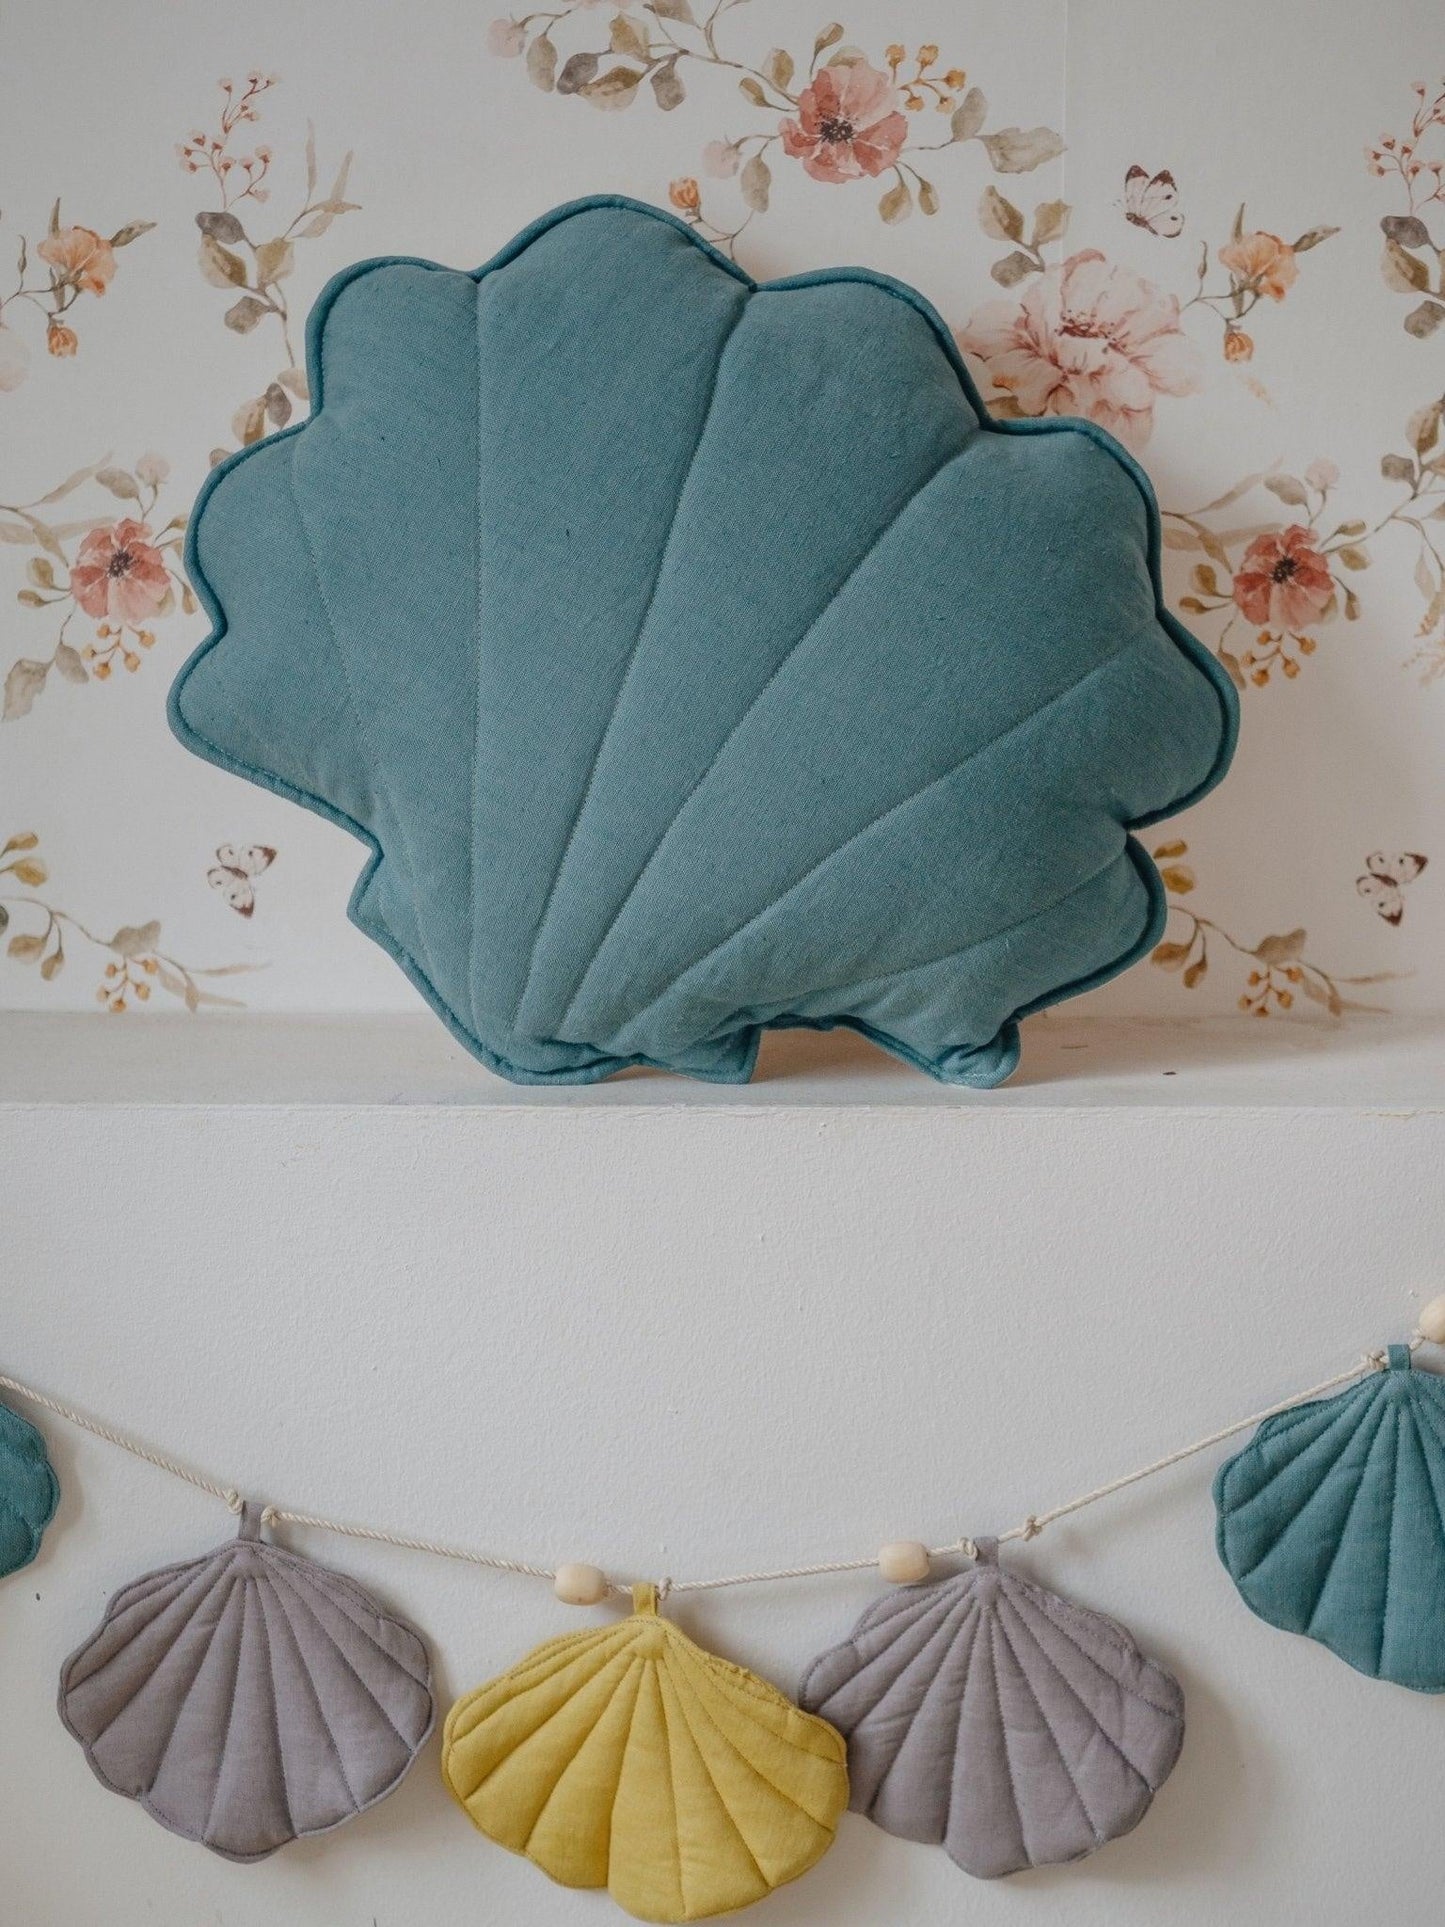 Linen “Eye of the Sea” Shell Pillow by Moi Mili